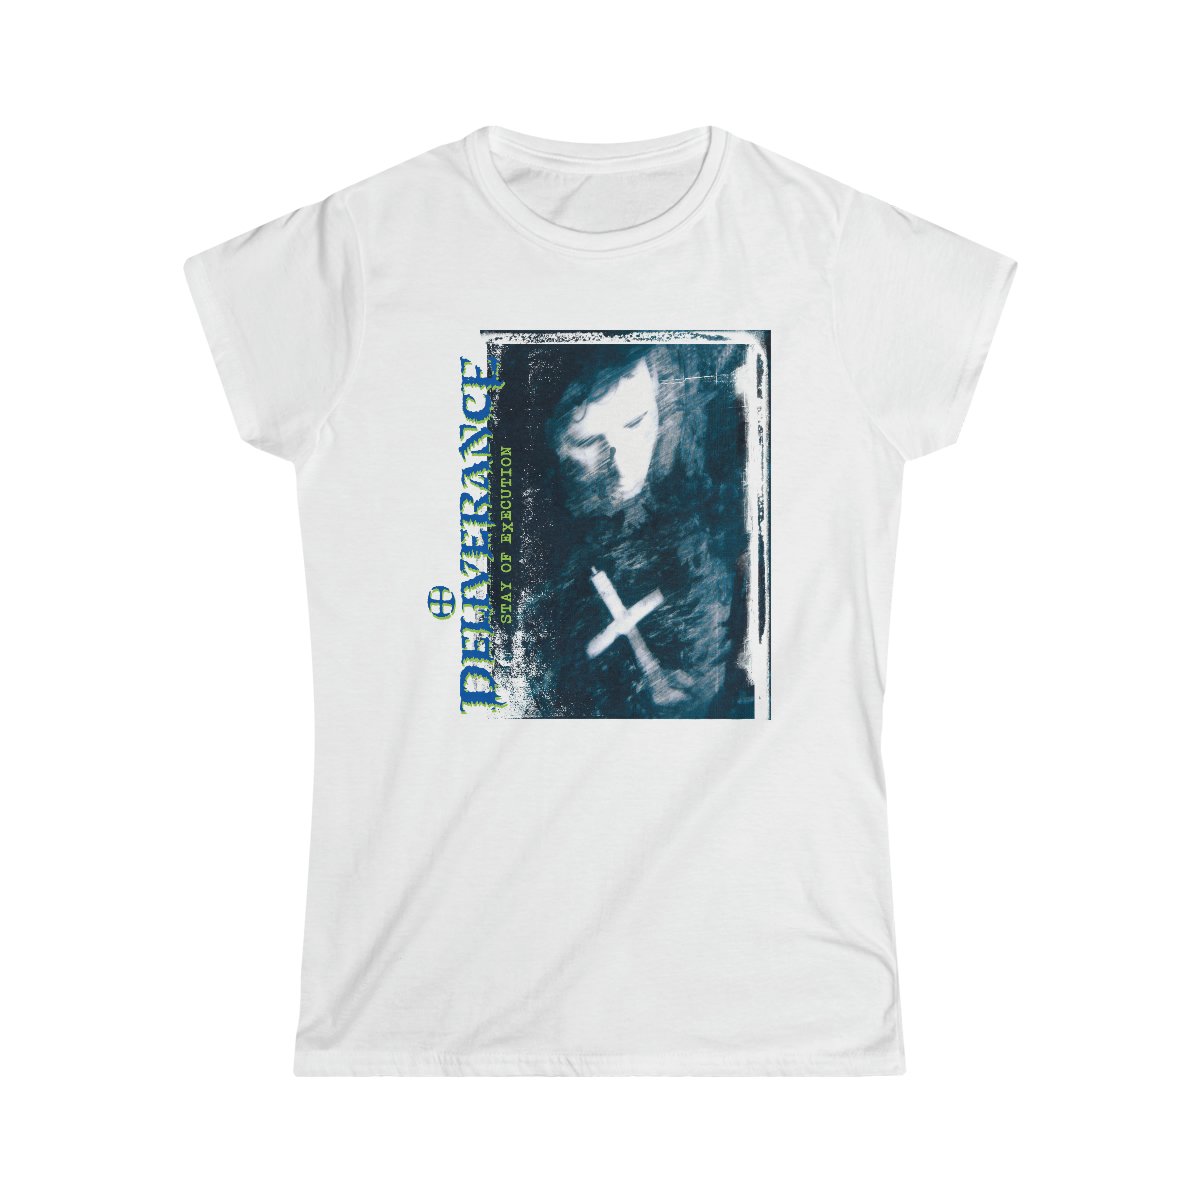 Deliverance – Stay of Execution Women’s Short Sleeve Tshirt 64000L